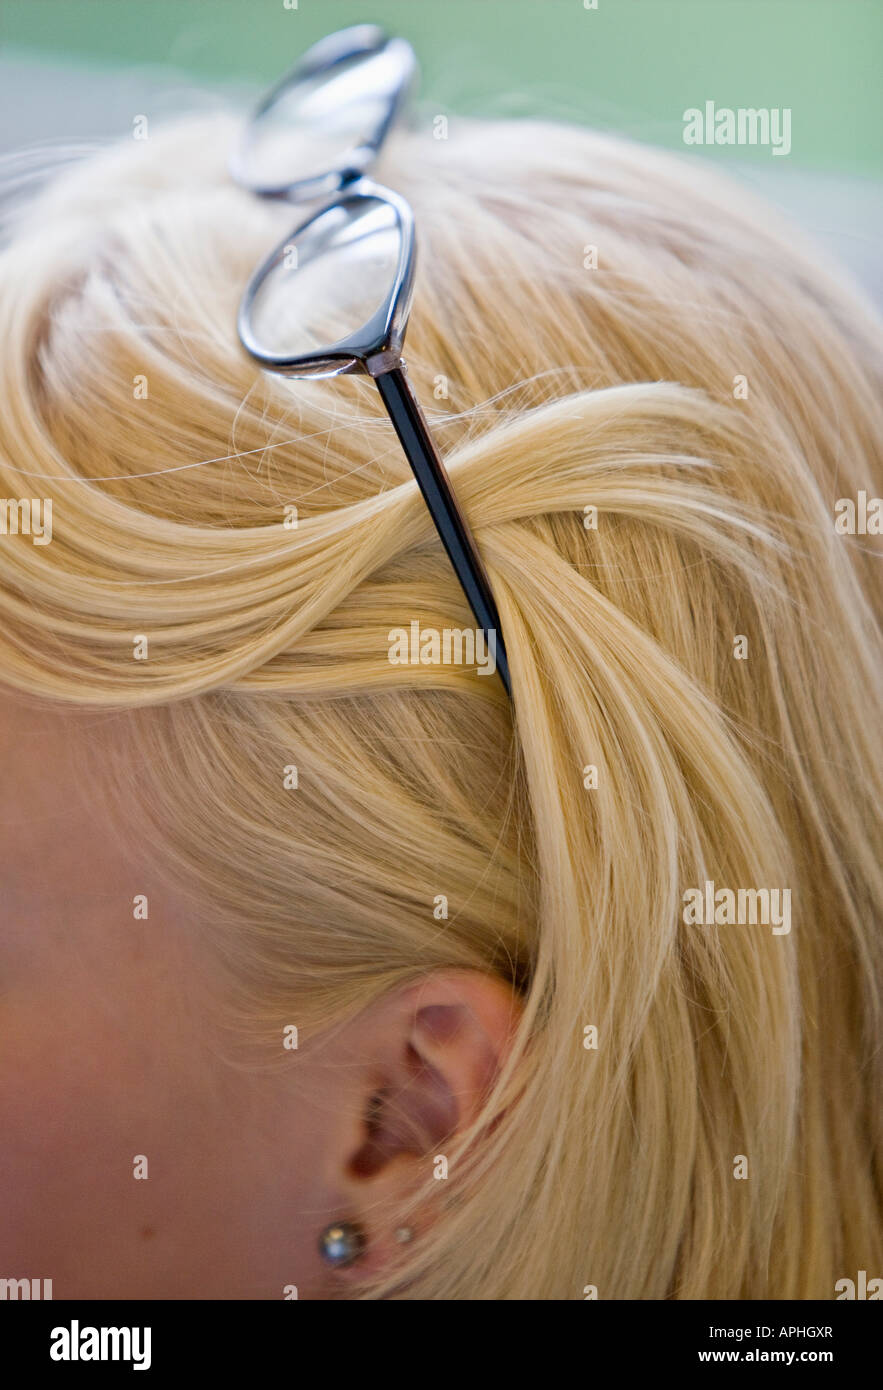 Glasses in blond hair. Stock Photo